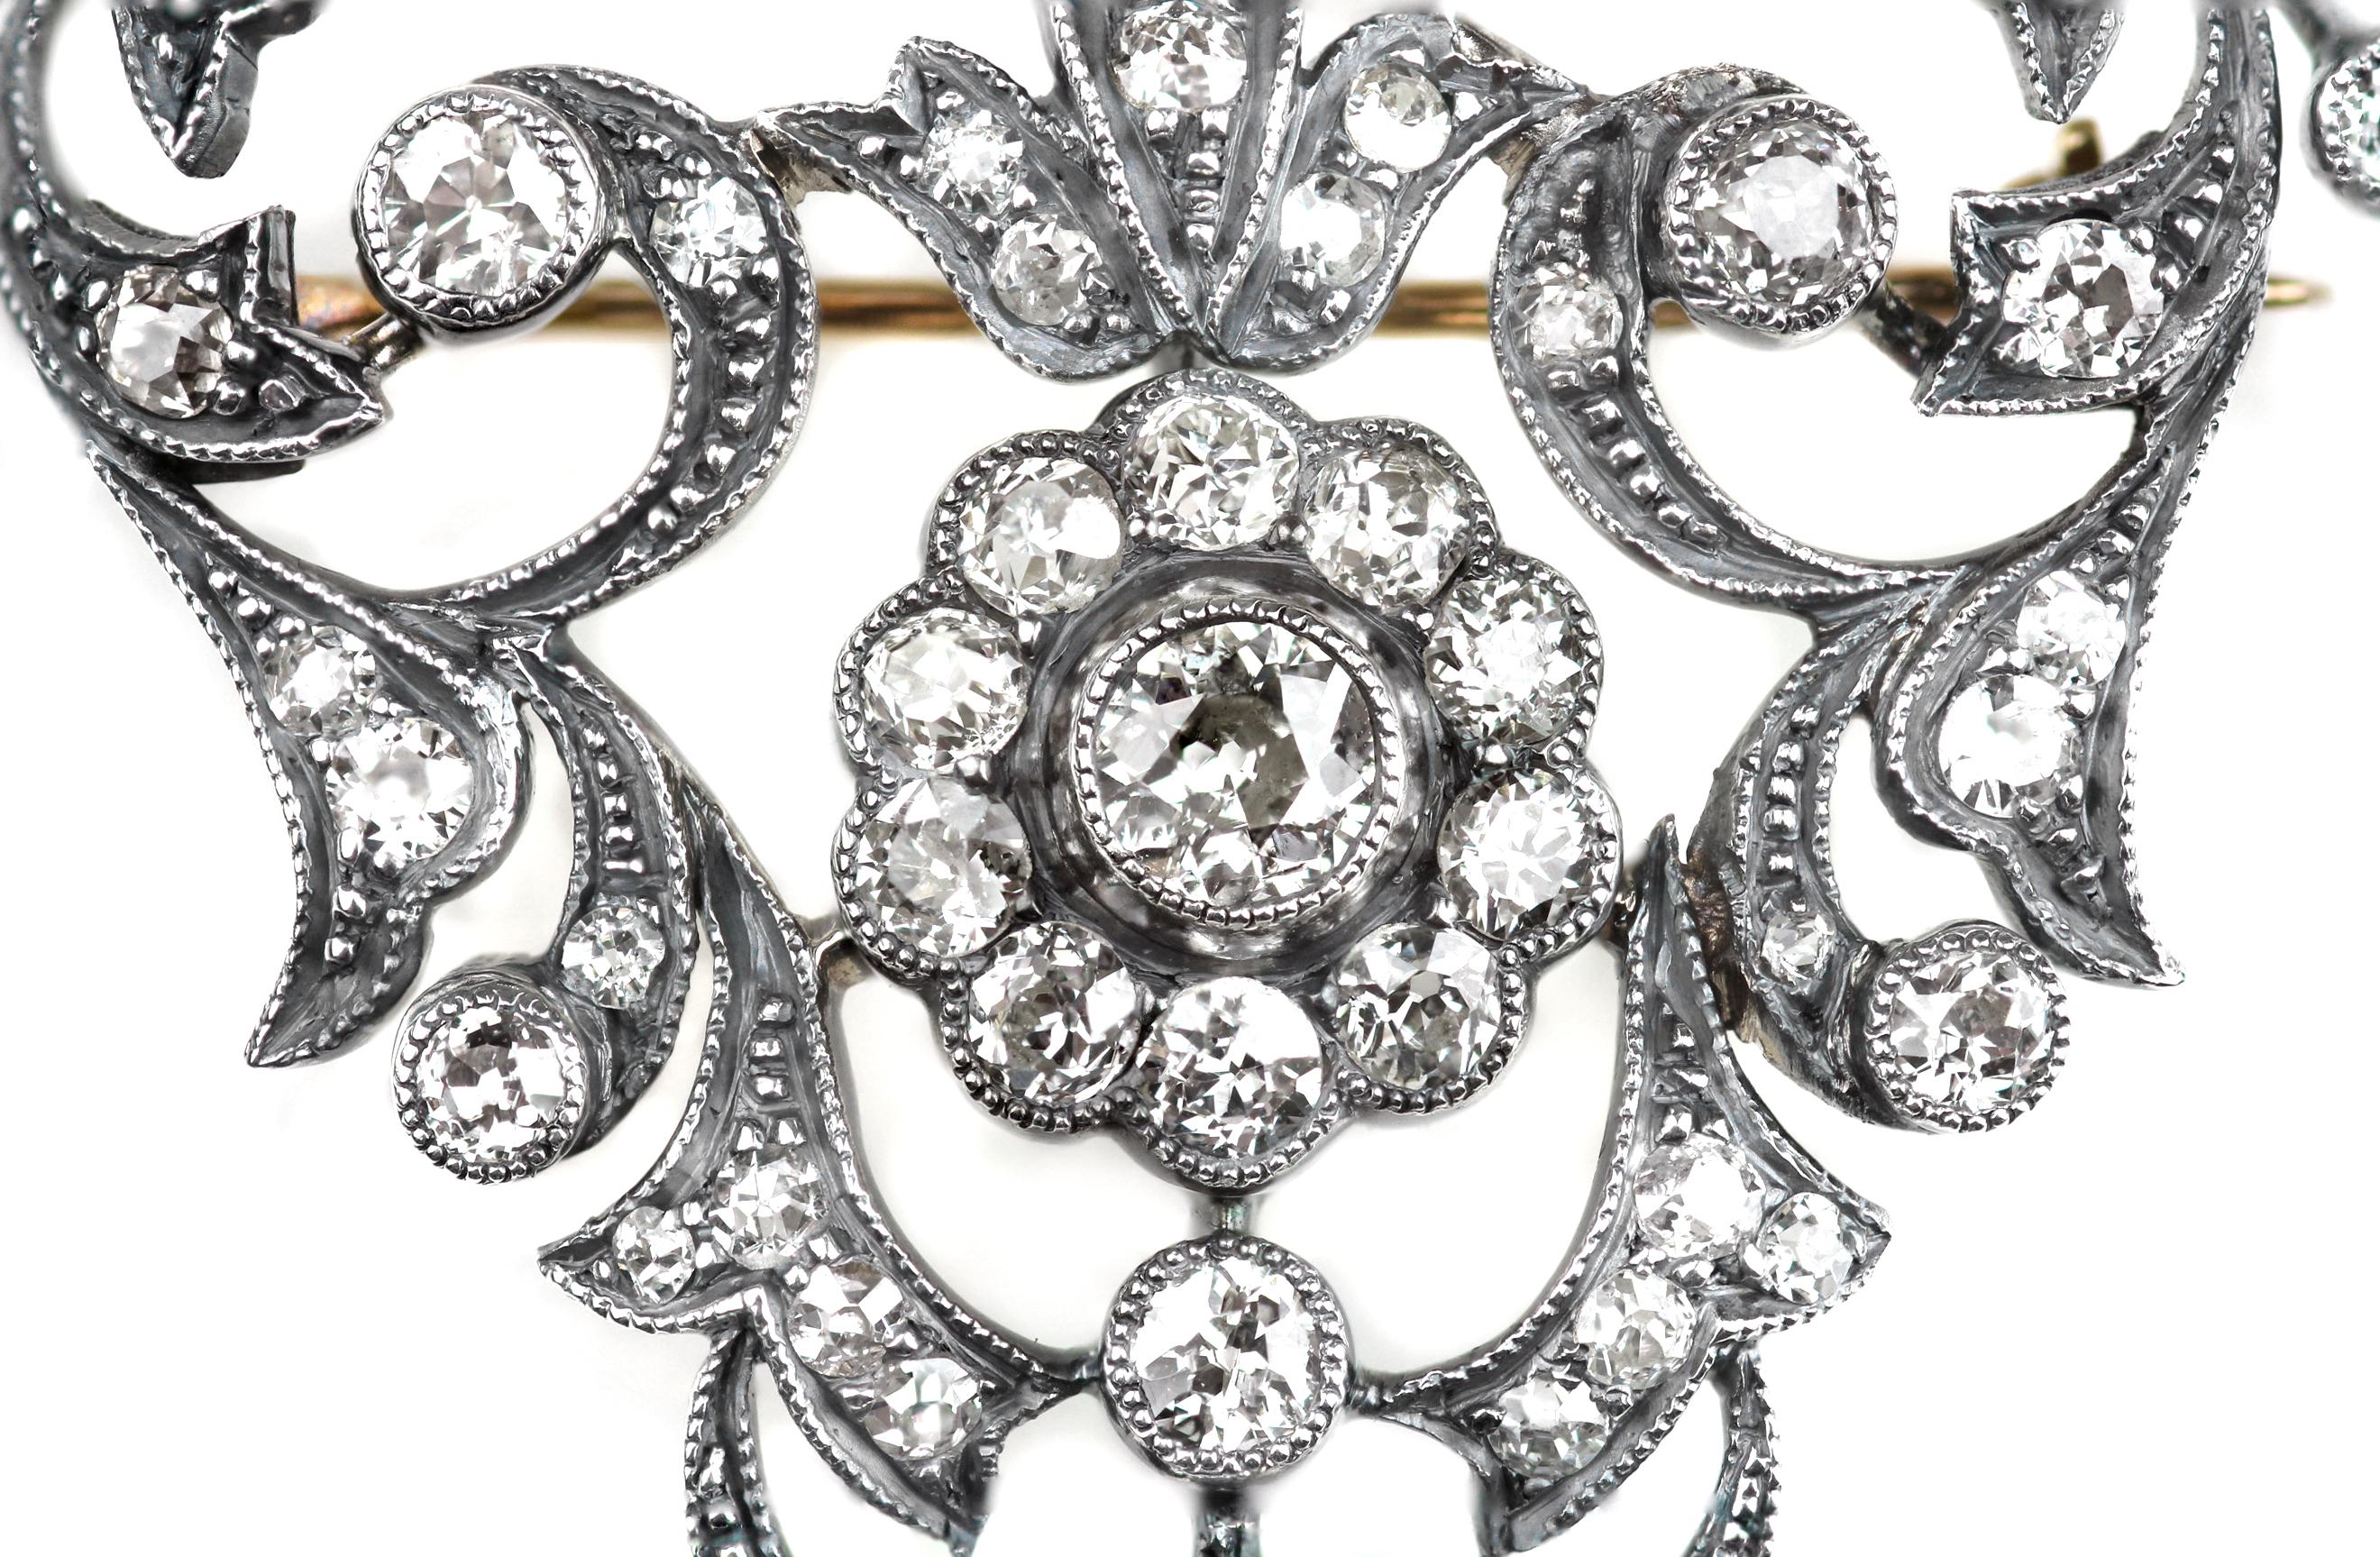 Antique Victorian filigree brooch with old European cut diamonds set in silver and gold. This brooch is a fine example of Victorian elegance and the jewellers art.
67 x old cut diamonds, approximate total weight 3.0 carats, assessed colour I/J,